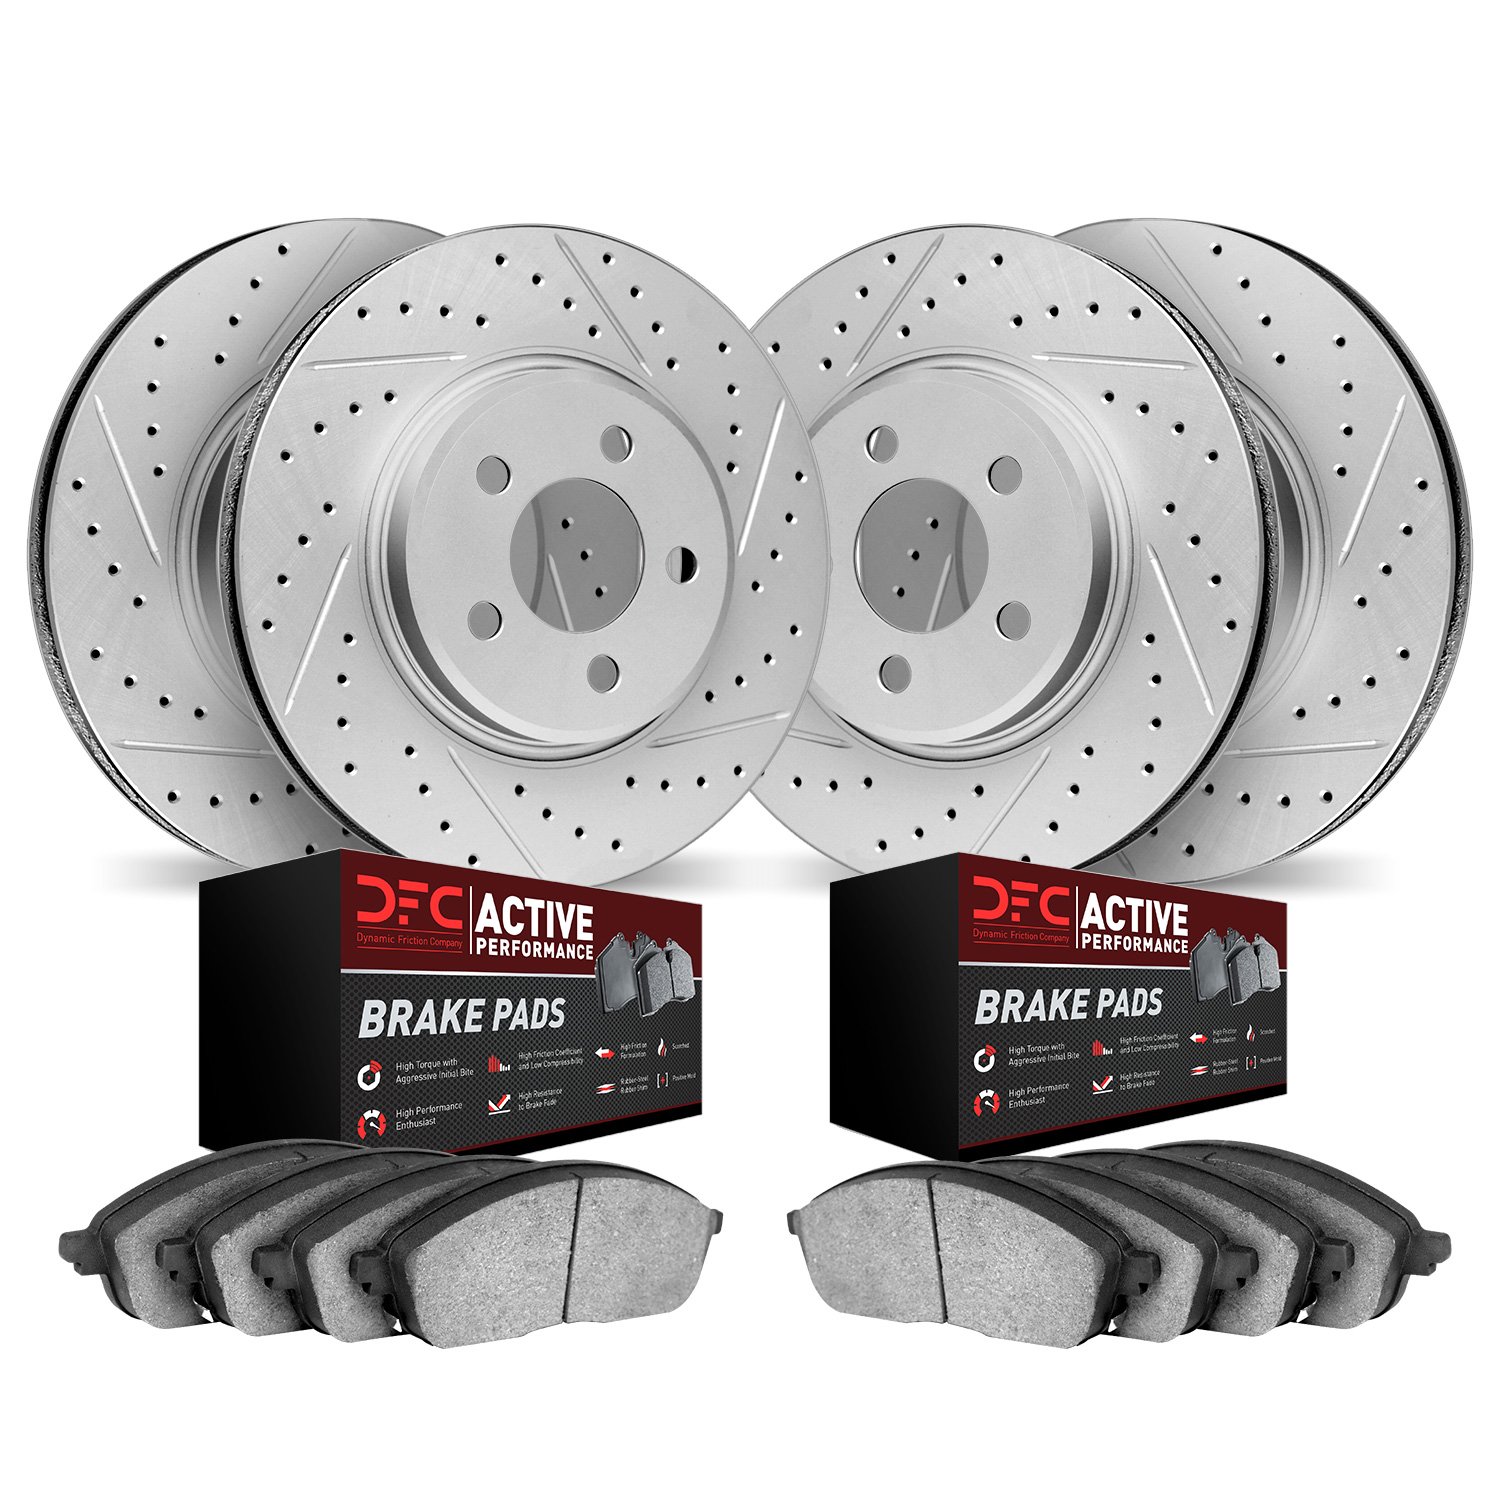 2704-68008 Geoperformance Drilled/Slotted Brake Rotors with Active Performance Pads Kit, Fits Select Infiniti/Nissan, Position: